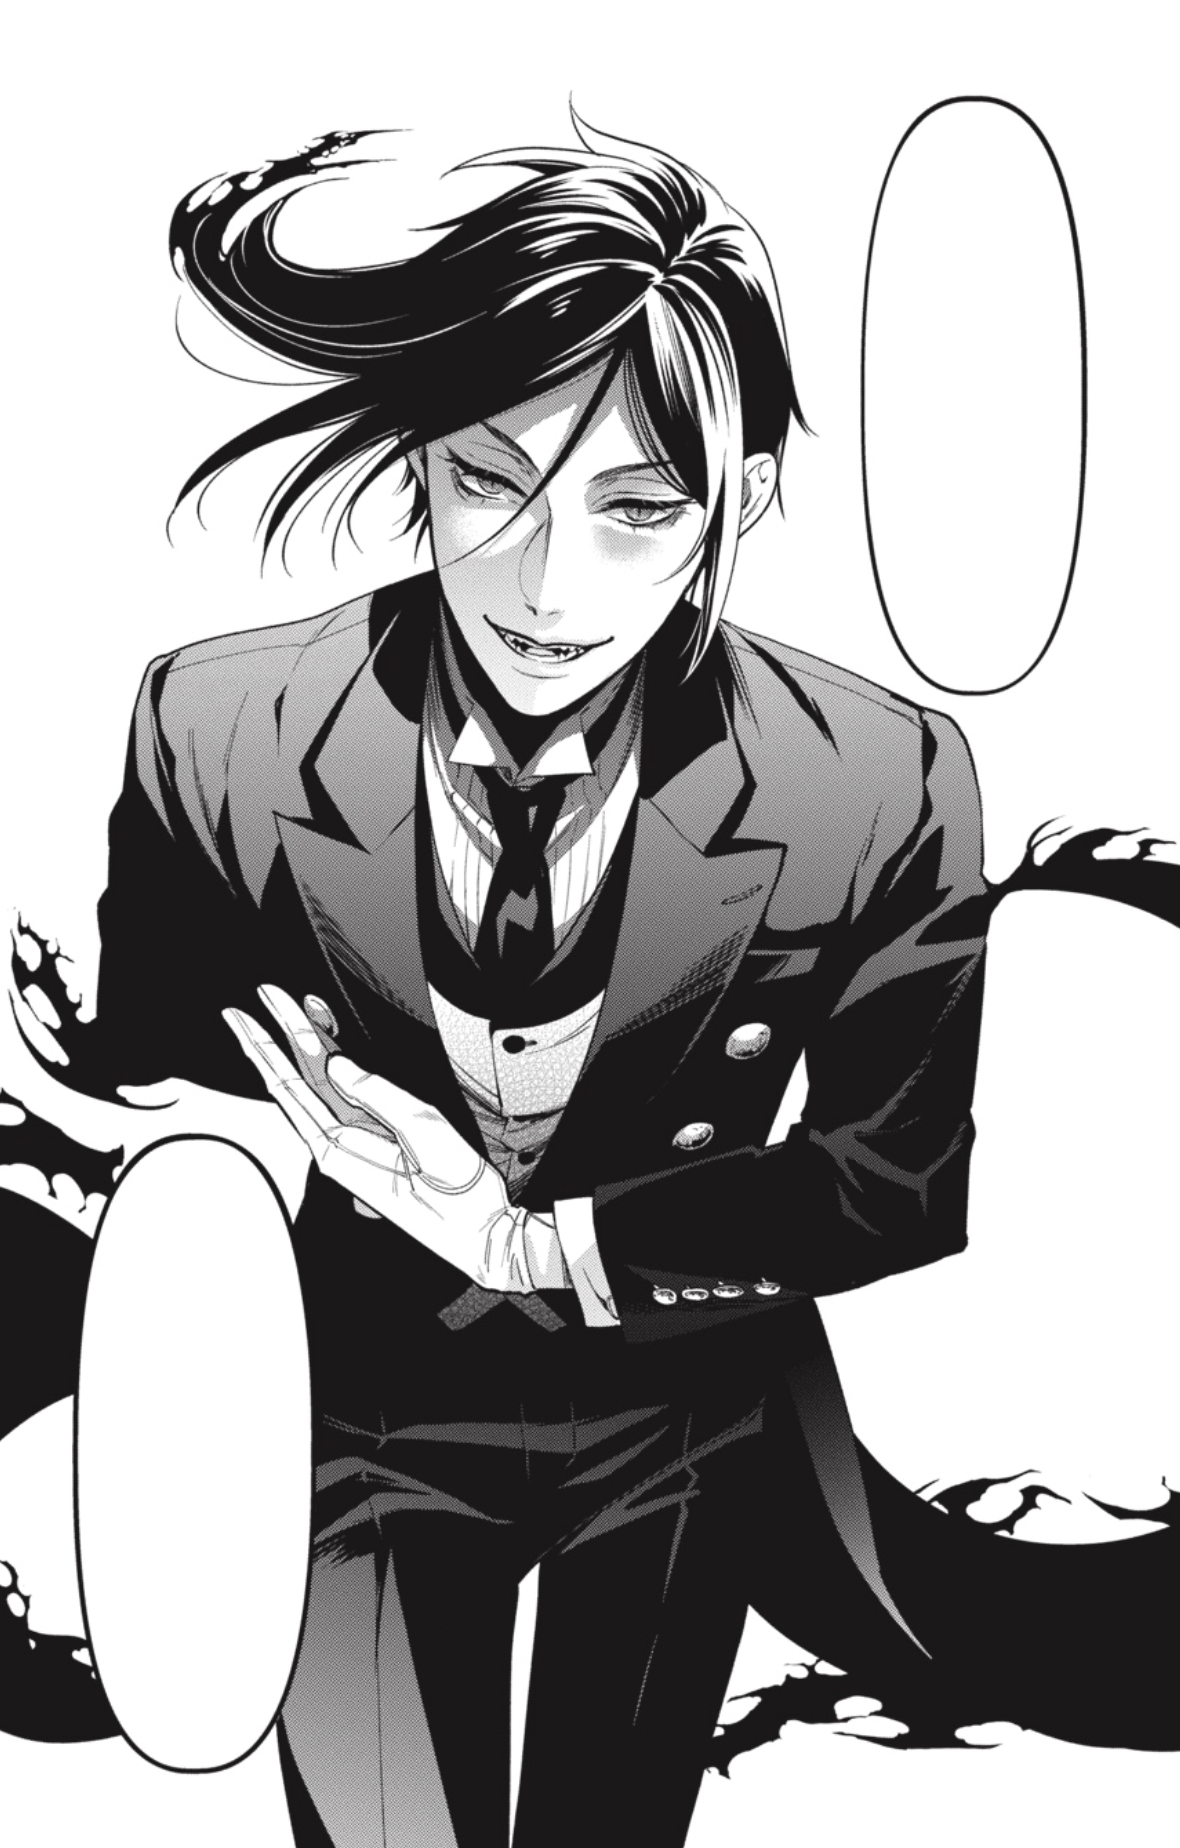 12 Facts About Sebastian Michaelis From Black Butler